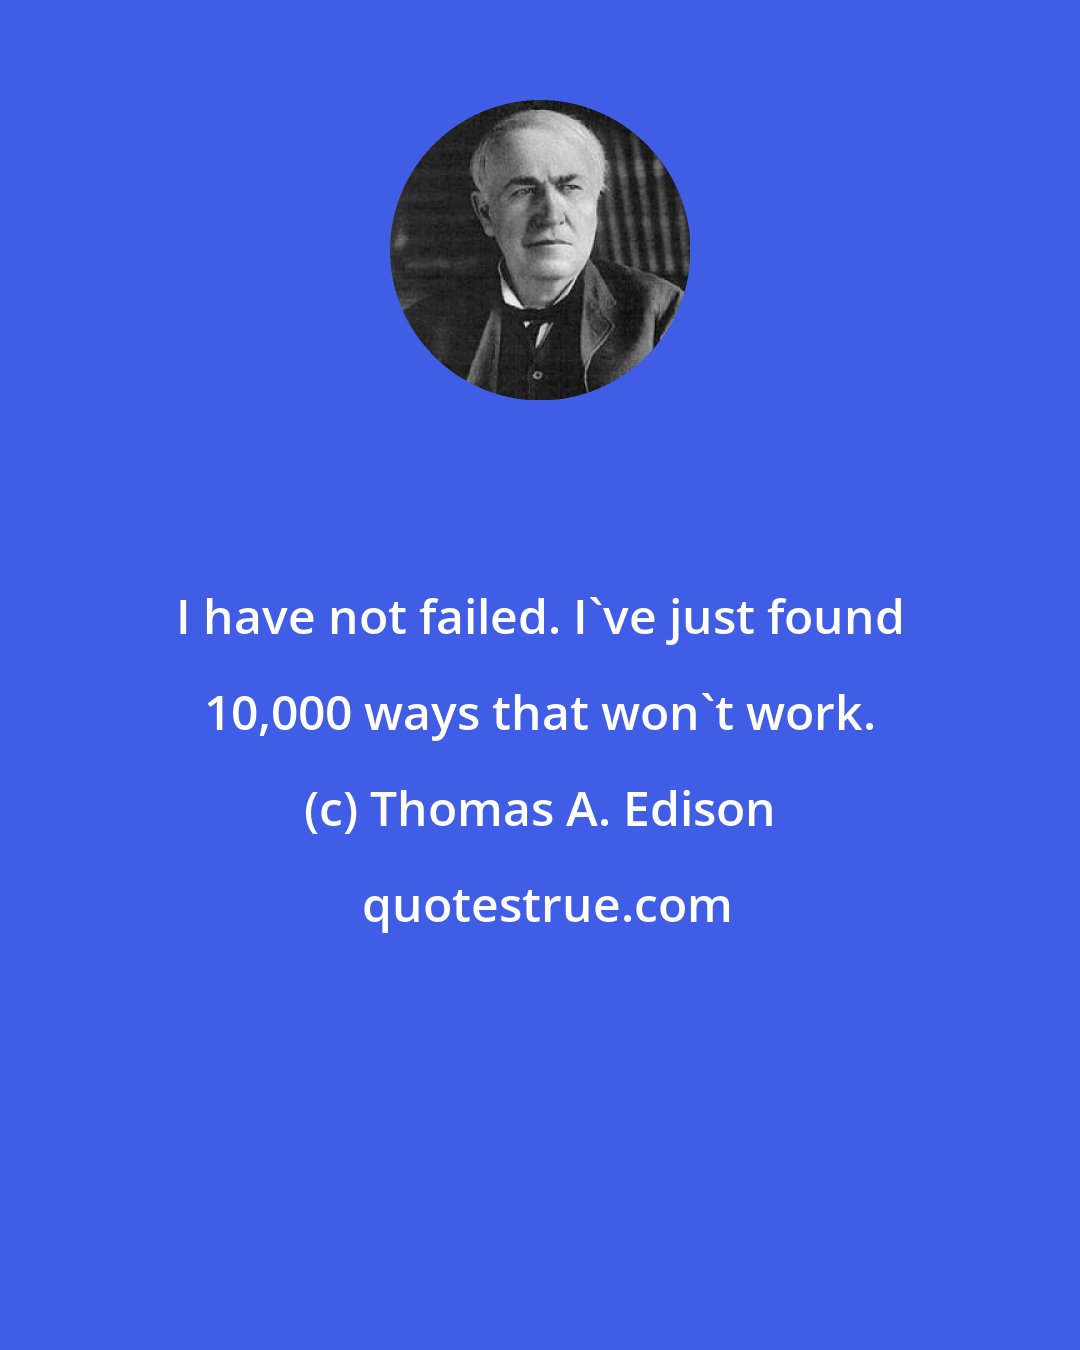 Thomas A. Edison: I have not failed. I've just found 10,000 ways that won't work.